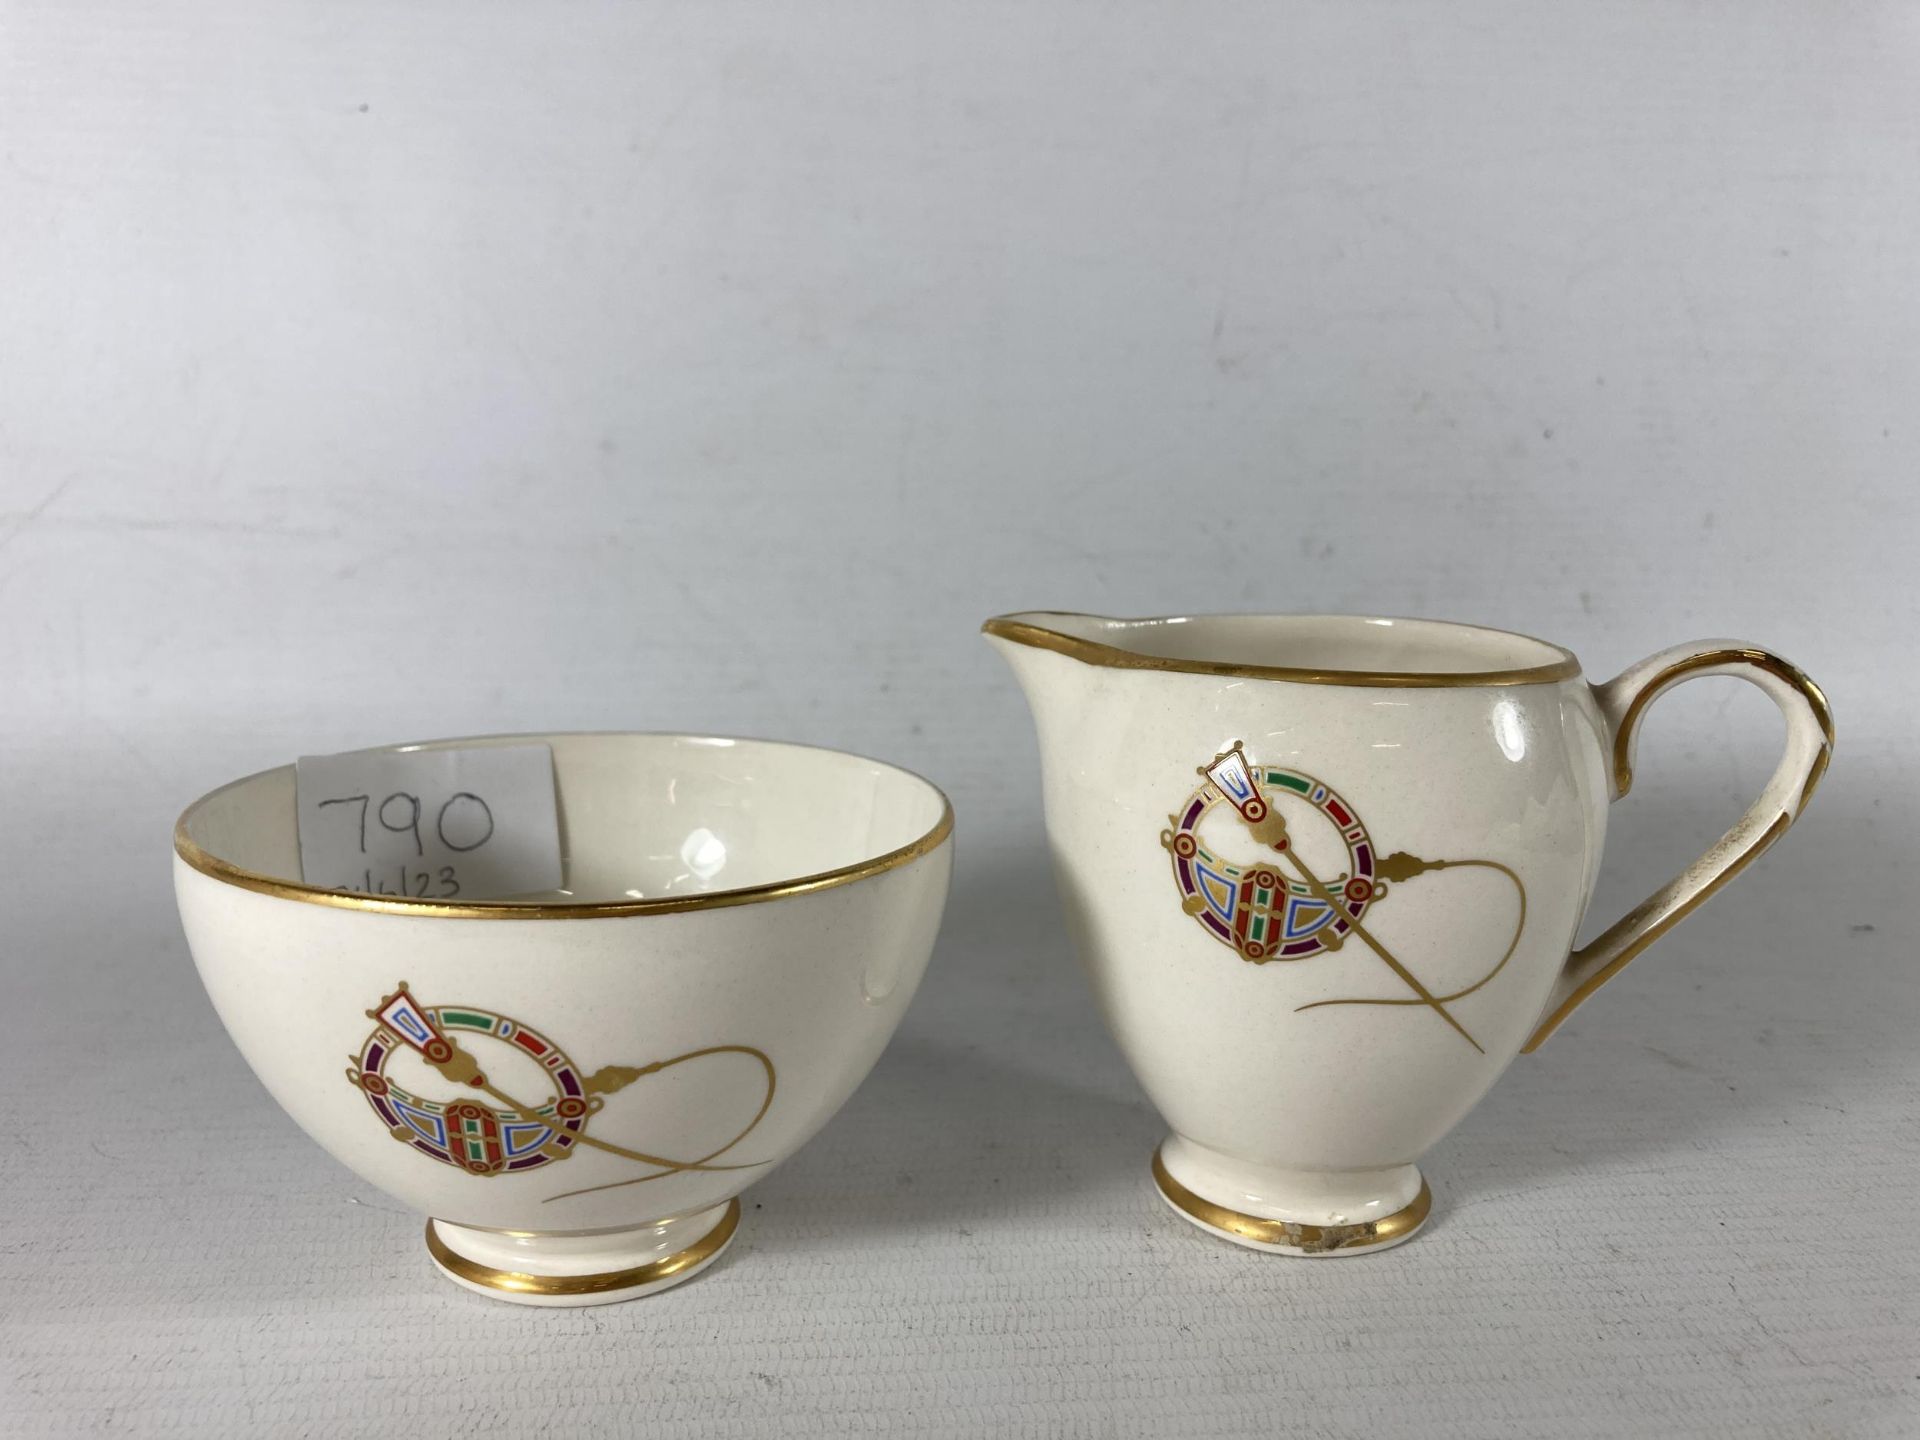 TWO PIECES OF IRISH ARKLOW POTTERY 'TARA BROOCH' TO INCLUDE A CREAM JUG AND SUGAR BOWL